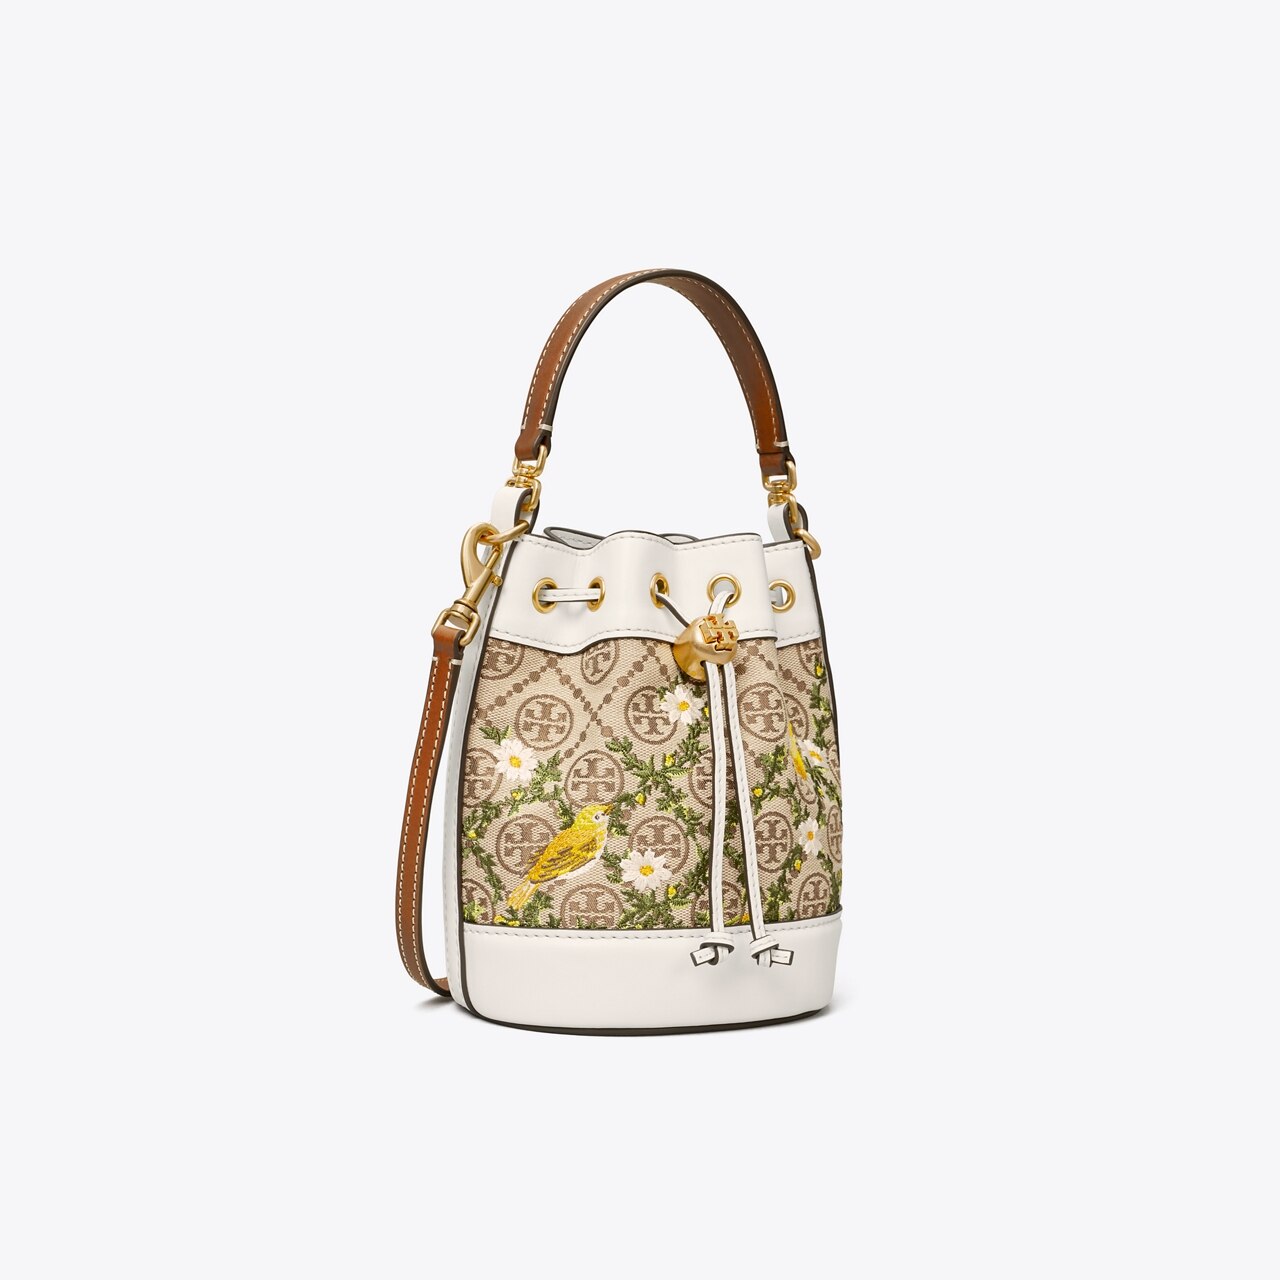 Tory Burch T Monogram Jacquard Embroidered Tote